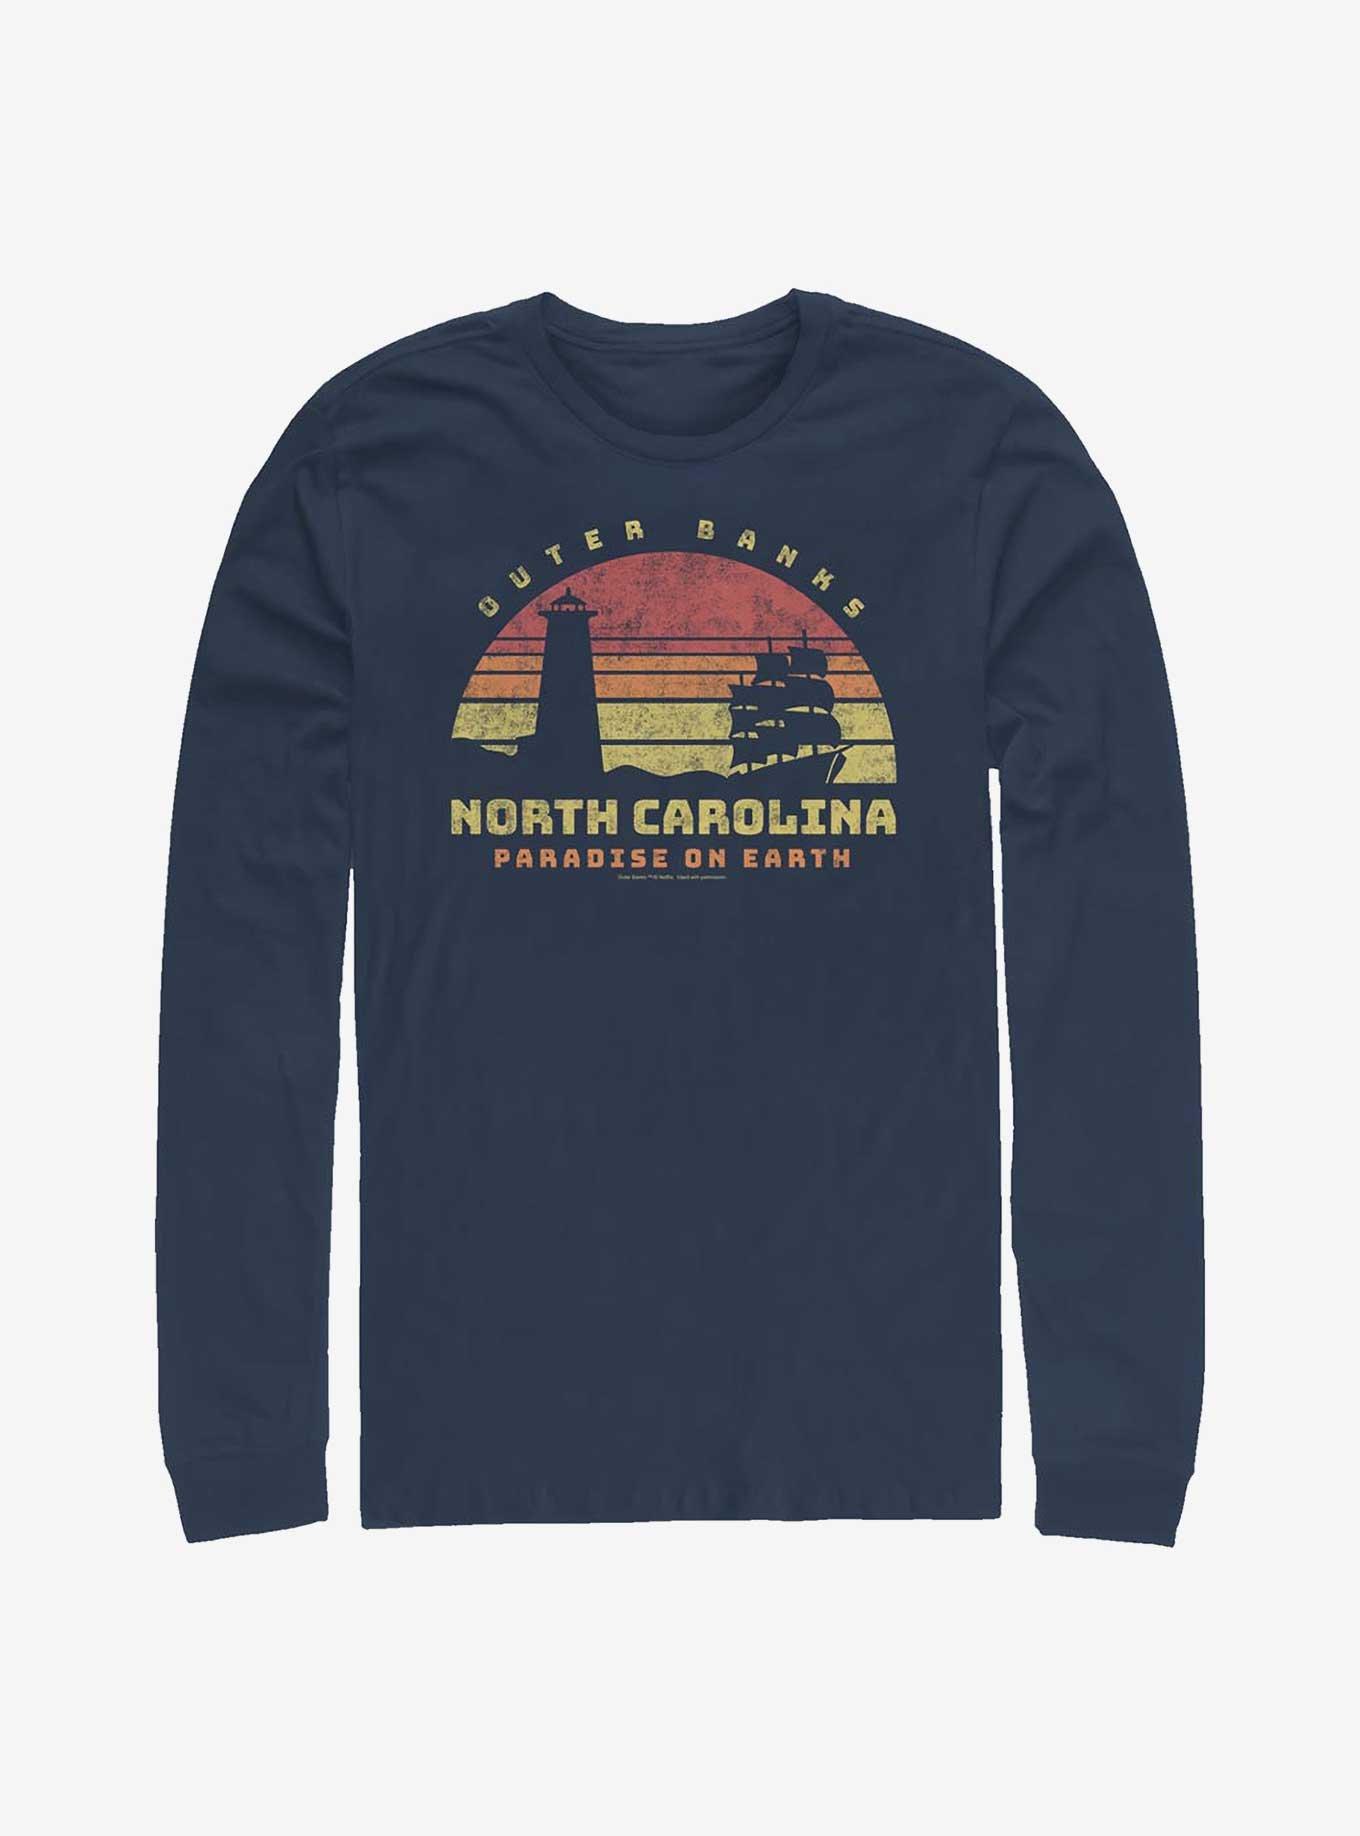 Outer Banks Paradise On Earth Long-Sleeve T-Shirt, NAVY, hi-res